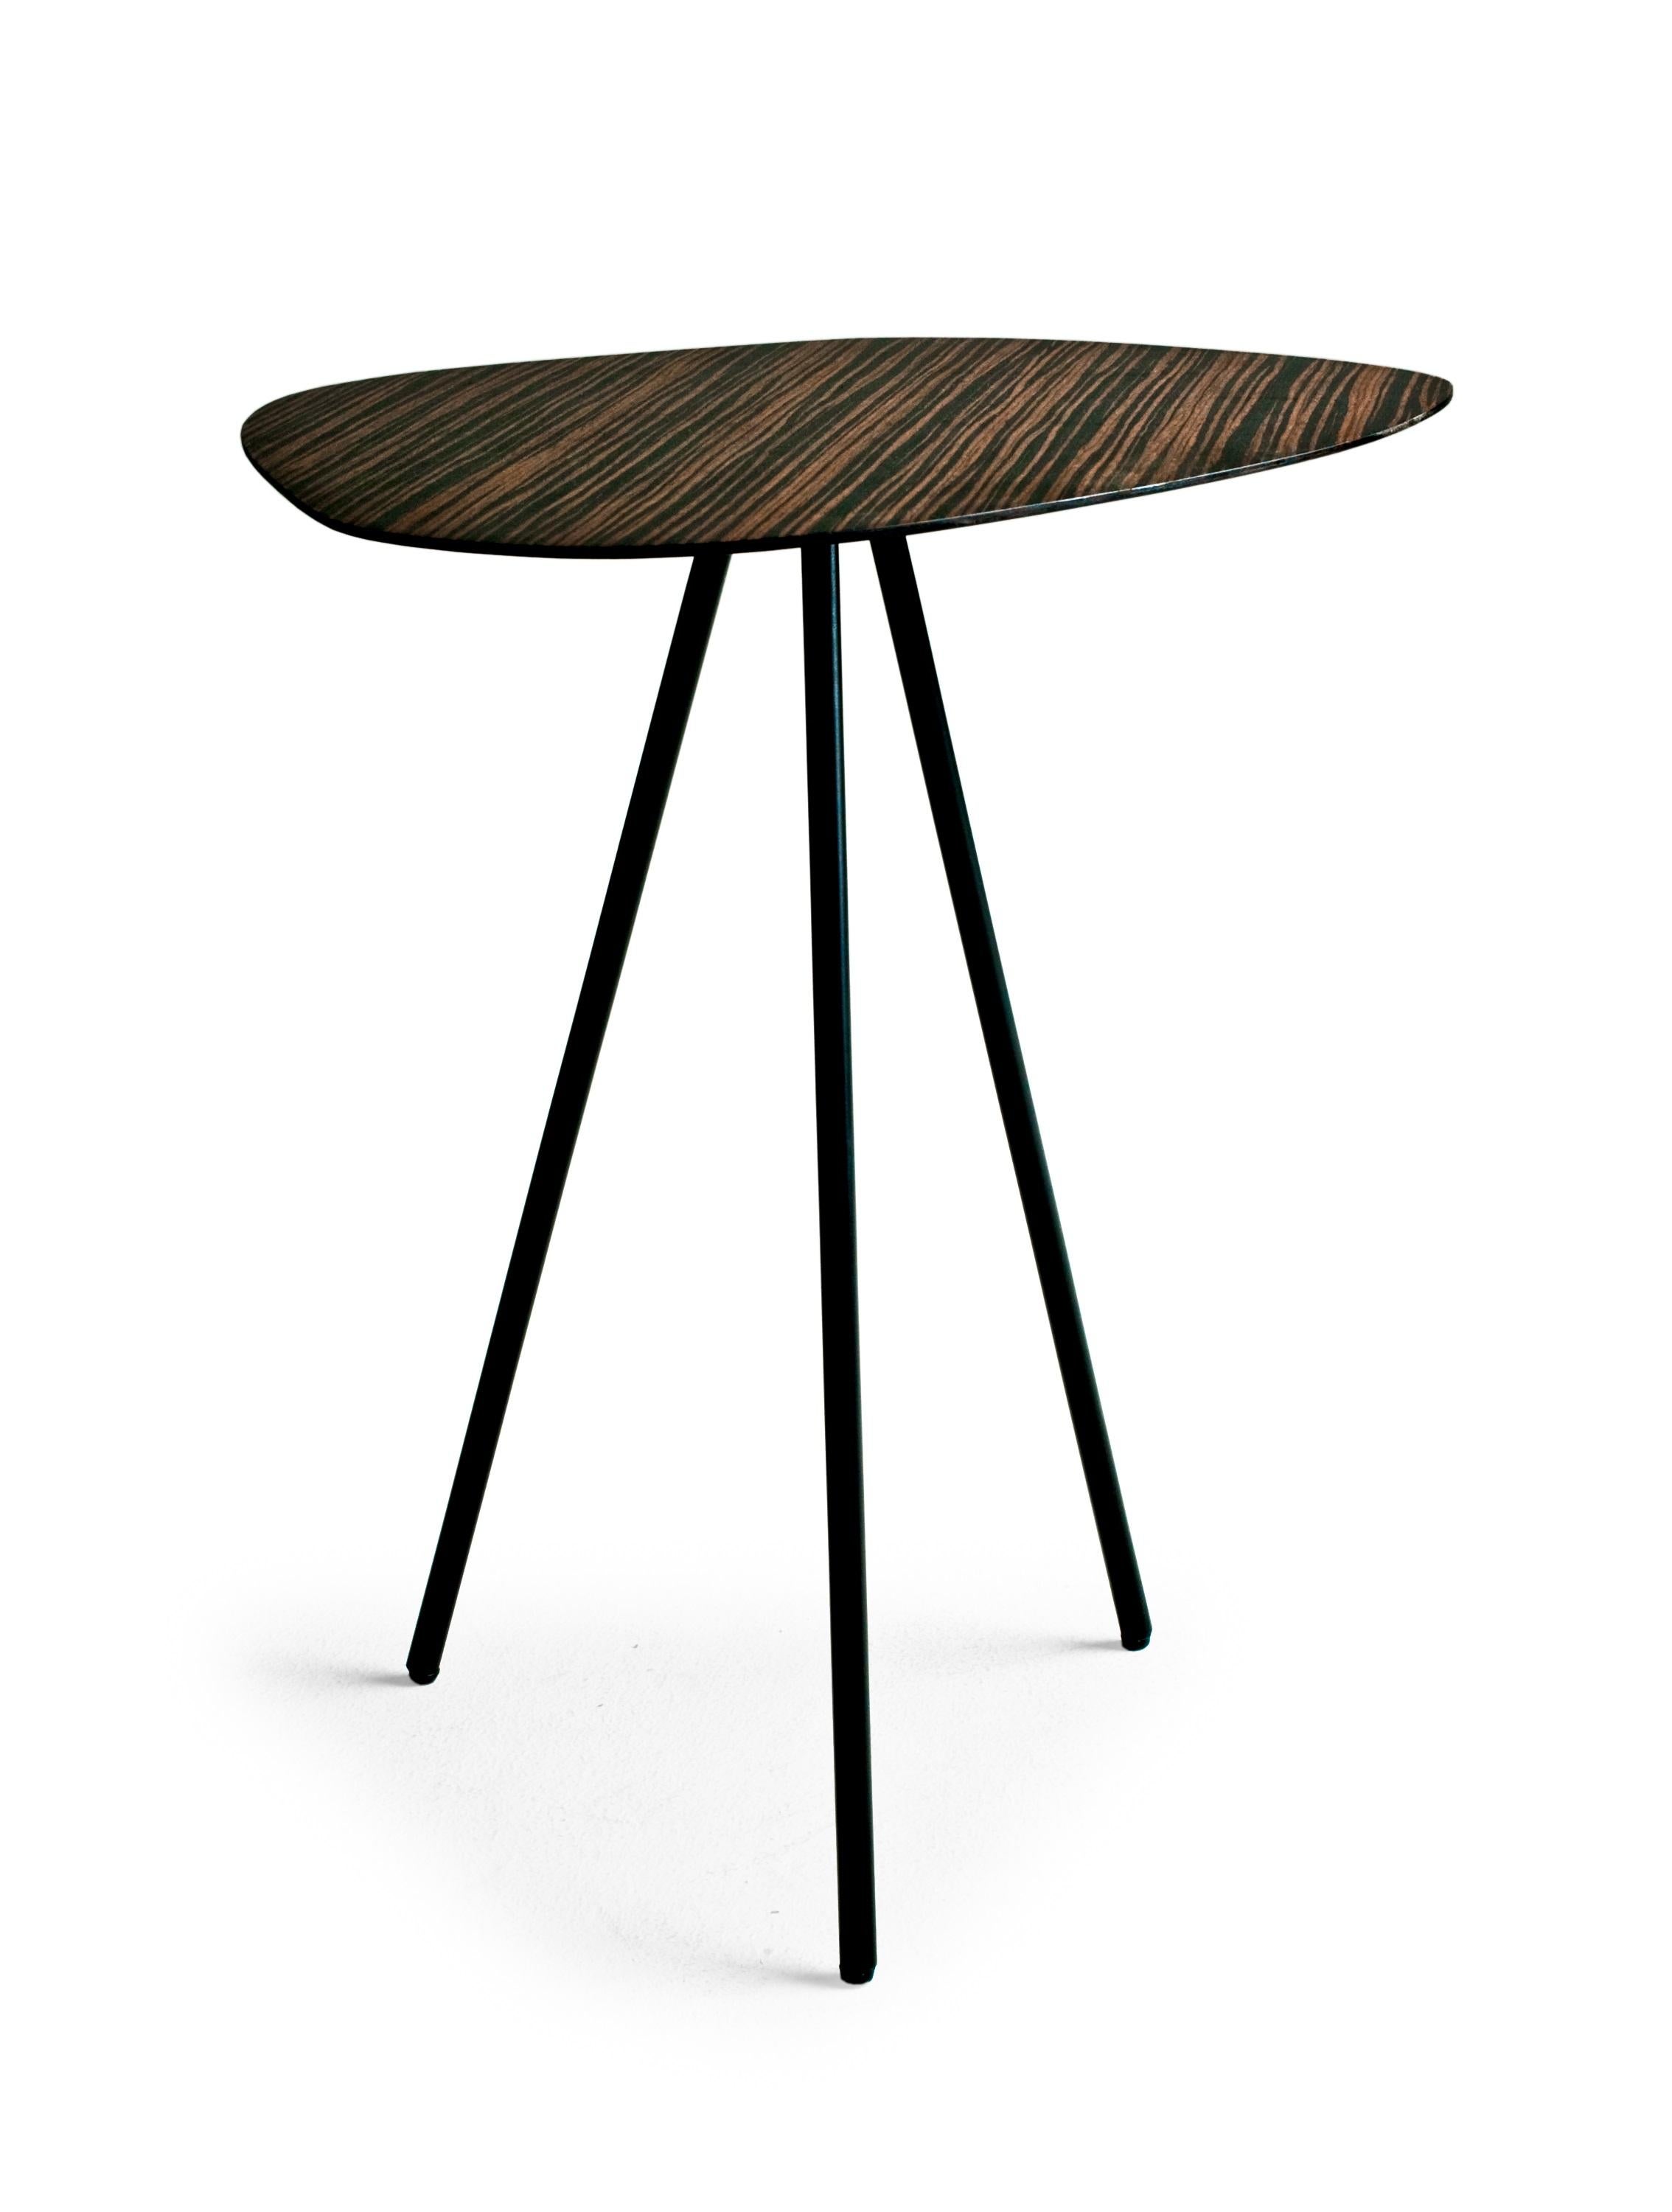 Black high indoor pebble end table by Kenneth Cobonpue.
Materials: black sapele steel. 
Also available in other colors and for indoors.
Dimensions: 36 cm x 47 cm x H 50 cm 

Pebble playfully echoes shapes found in nature like stepping-stones in